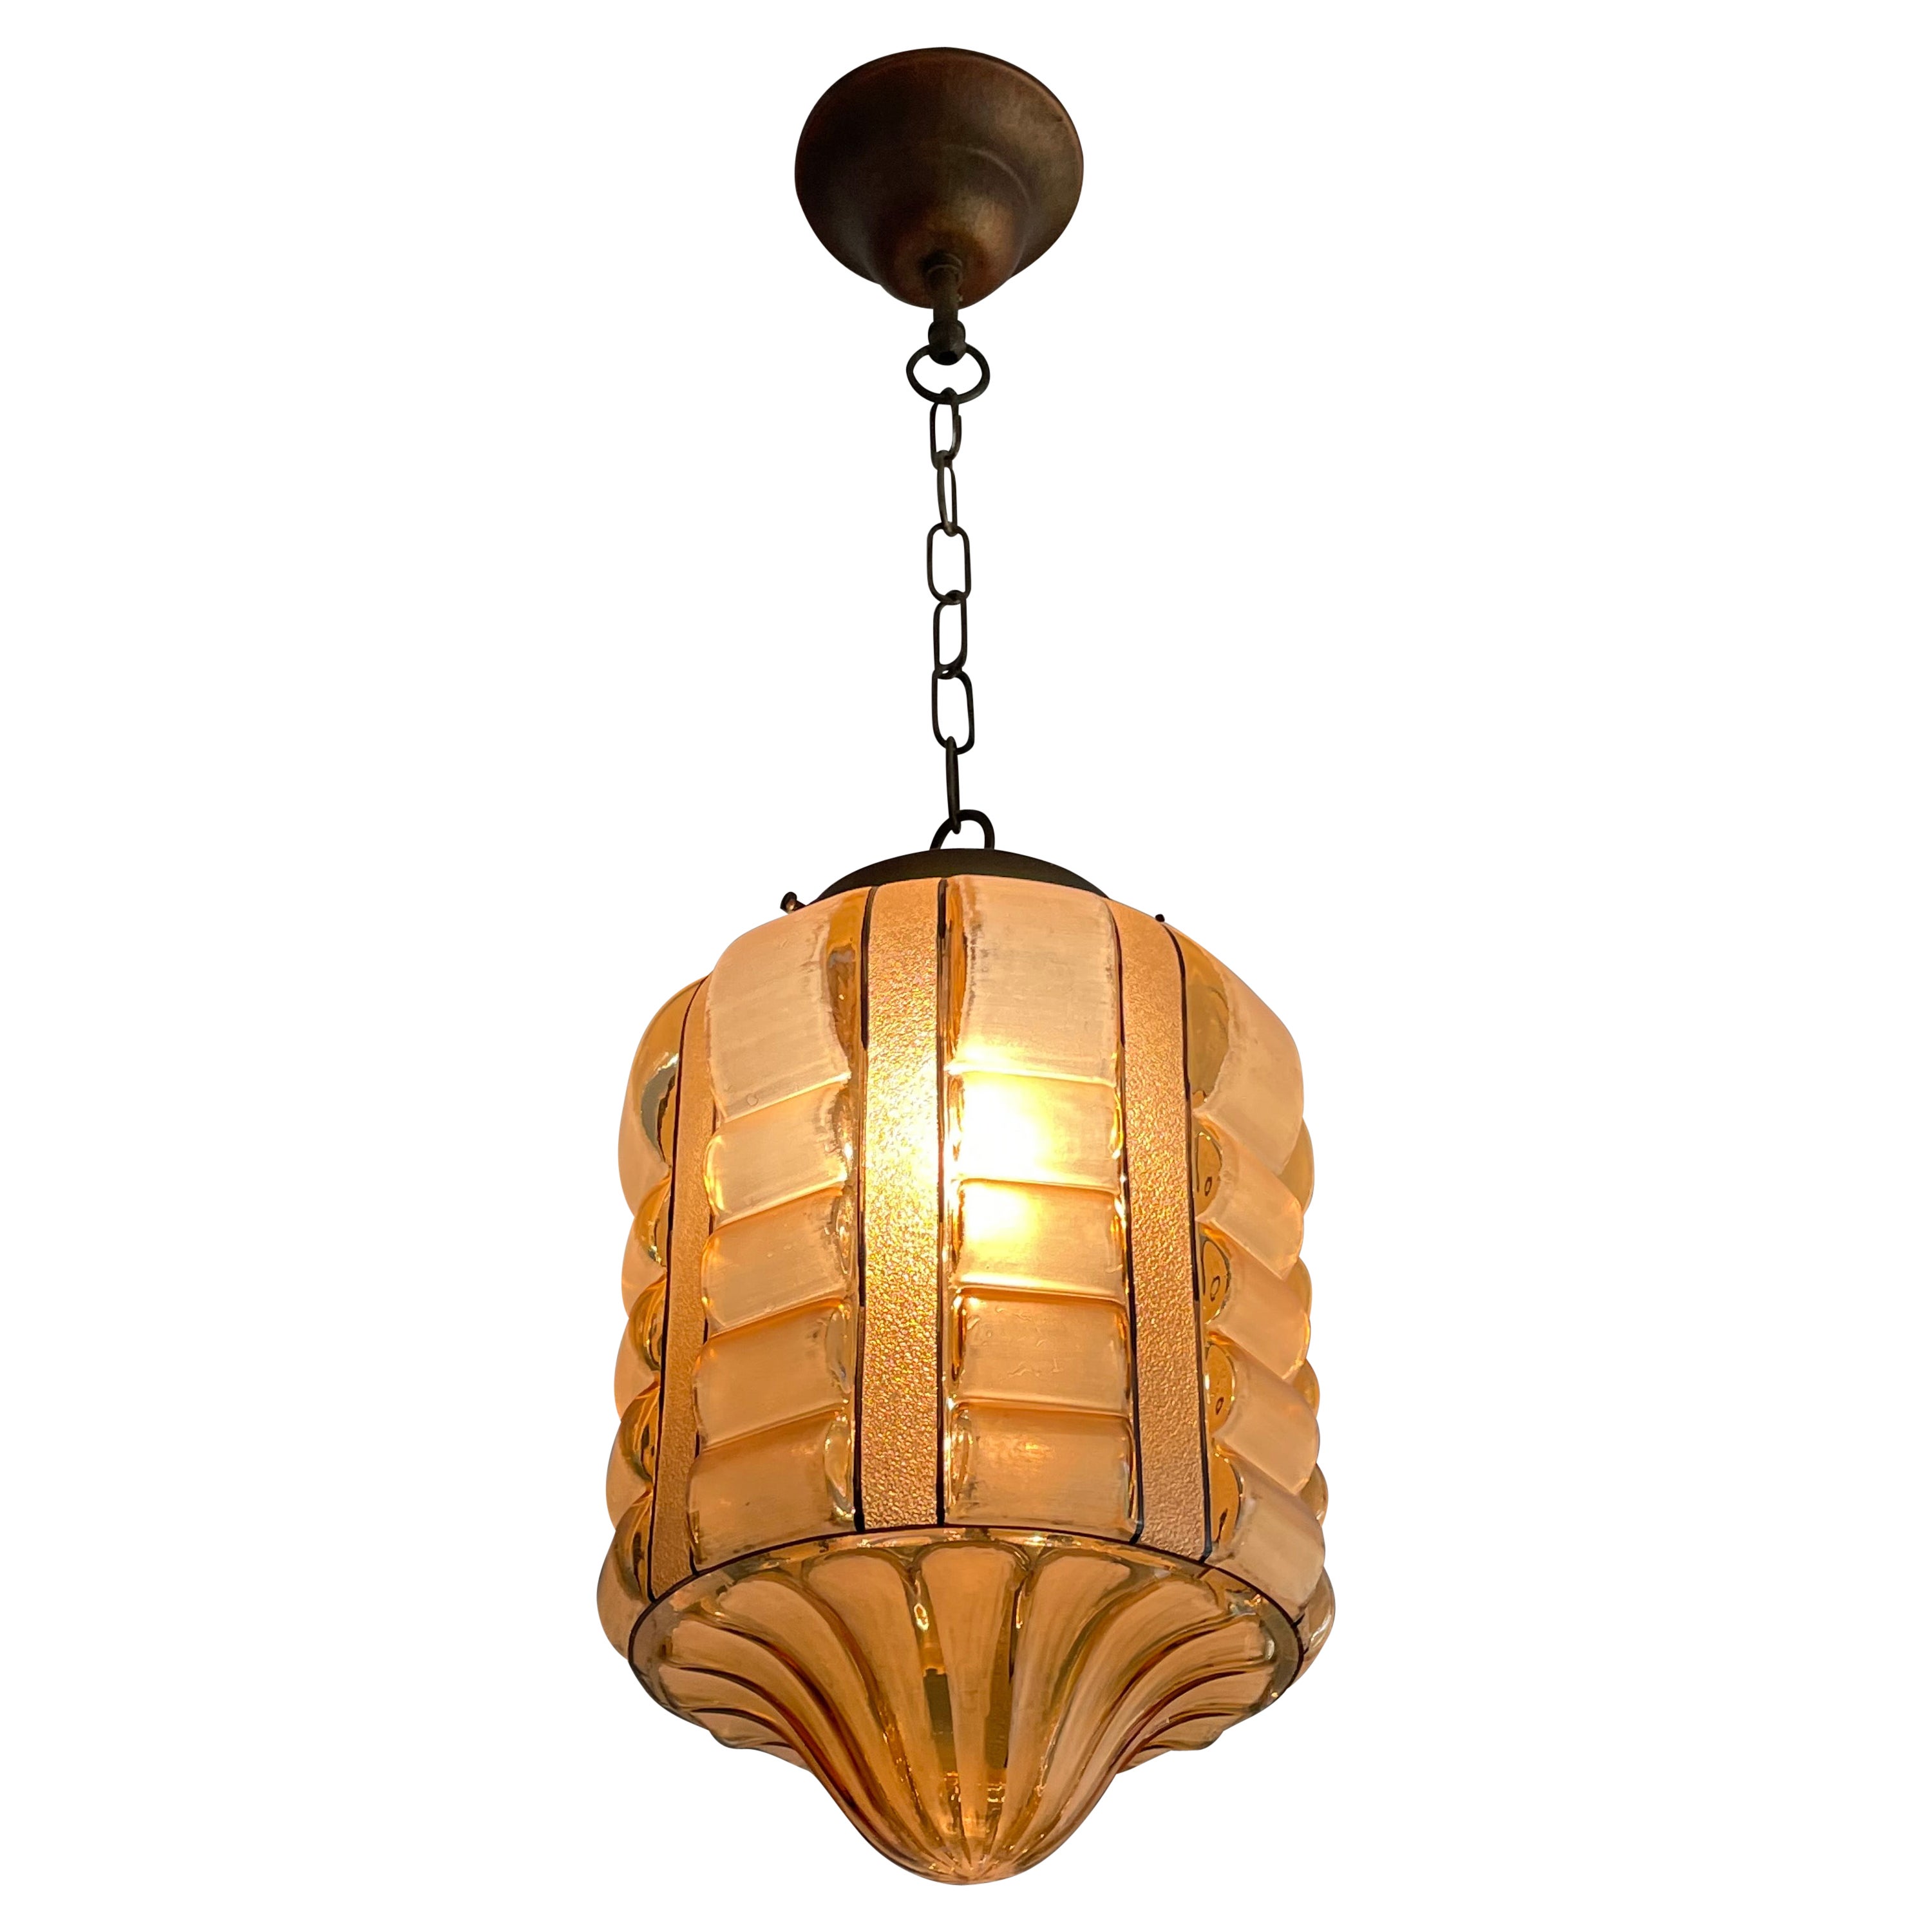 Rare Rounded Geometrical Design Art Deco Pendant Light with Brass Chain & Canopy